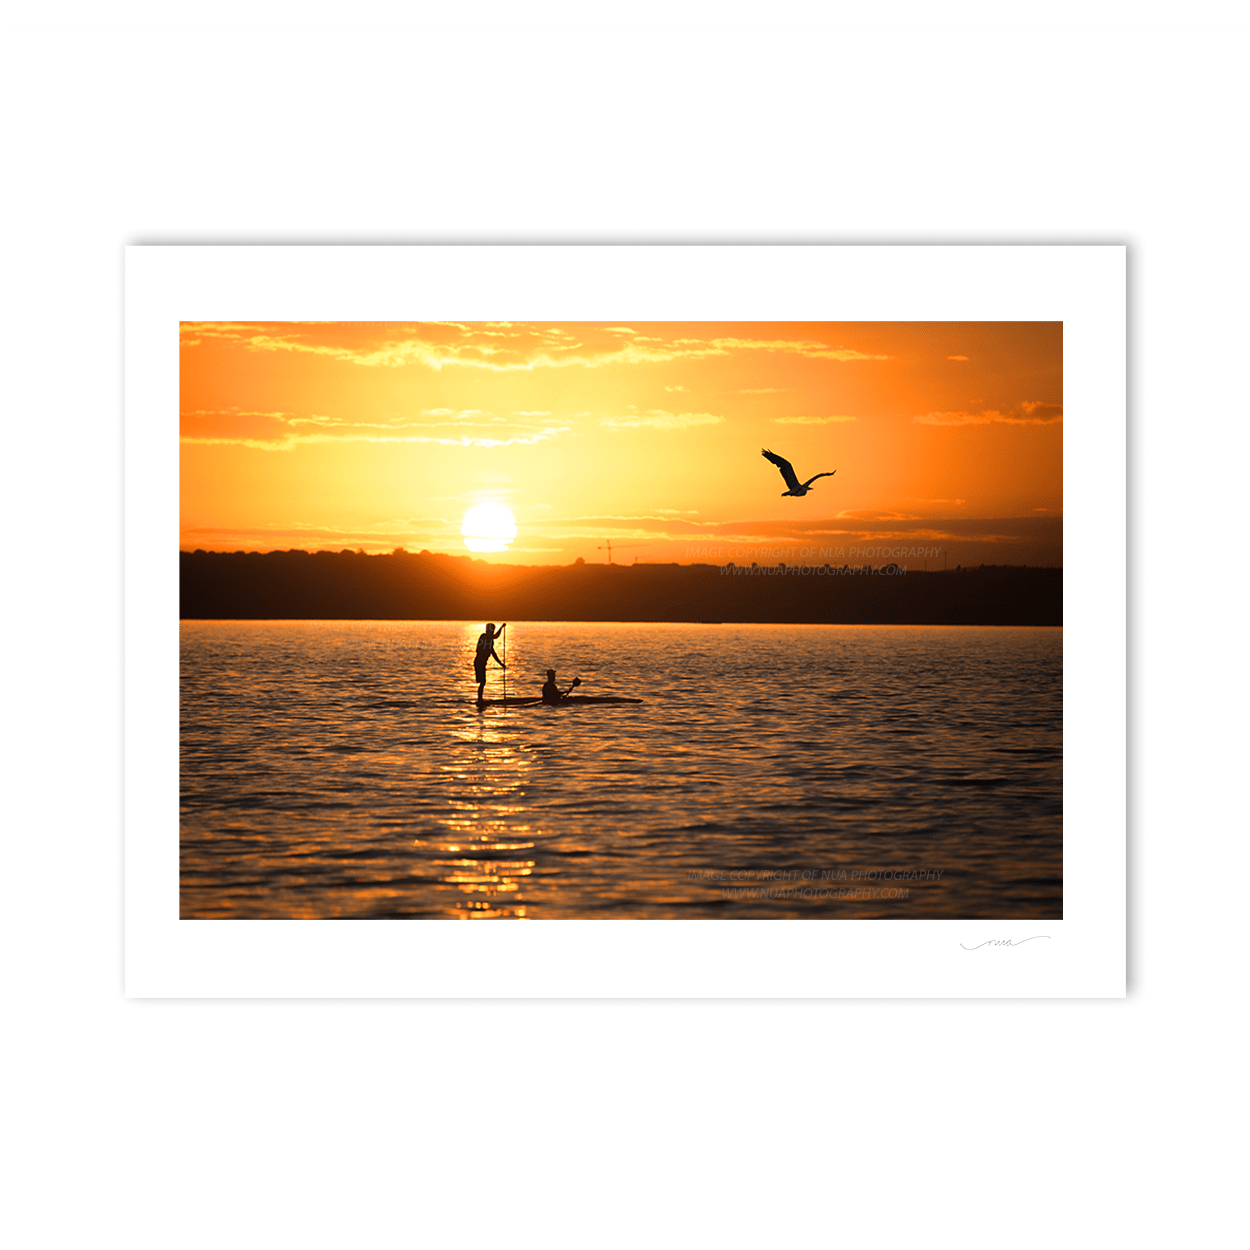 Nua Photography Print Skerries Paddle Boarder at sunset 26